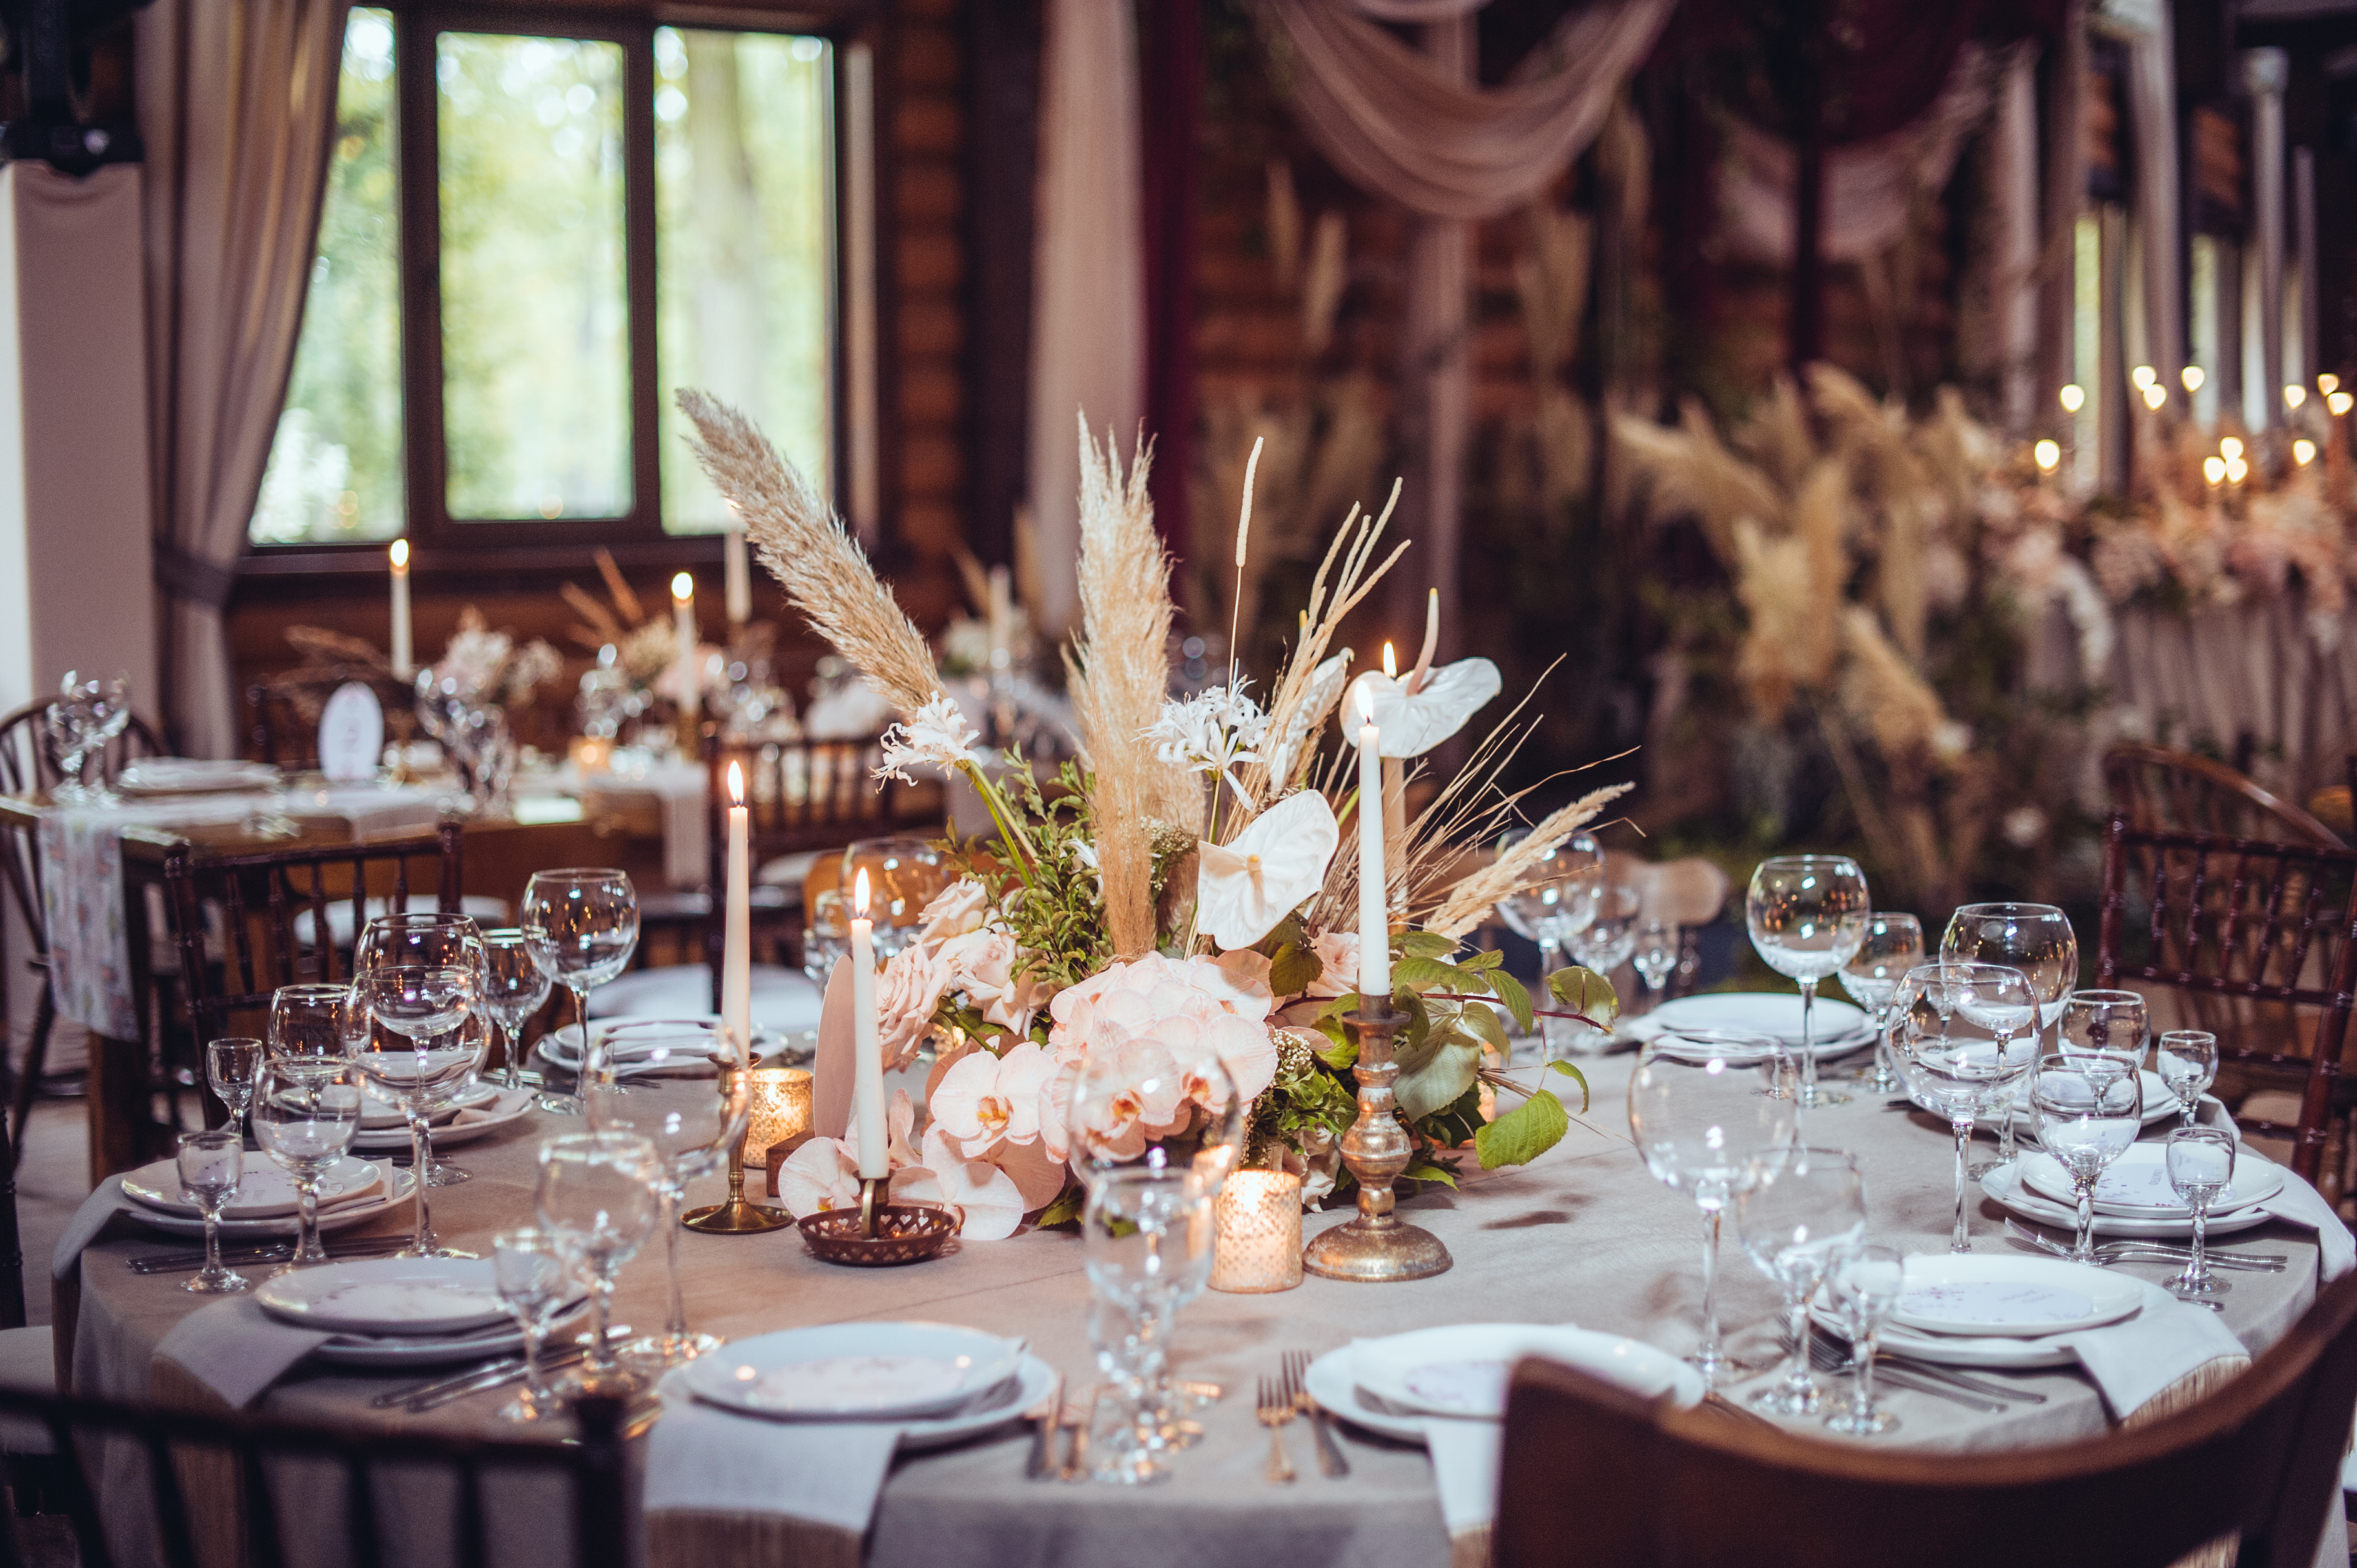 Rustic,Wedding,Decorations,With,Flowers,And,Candles.,Banquet,Decor.,Picture